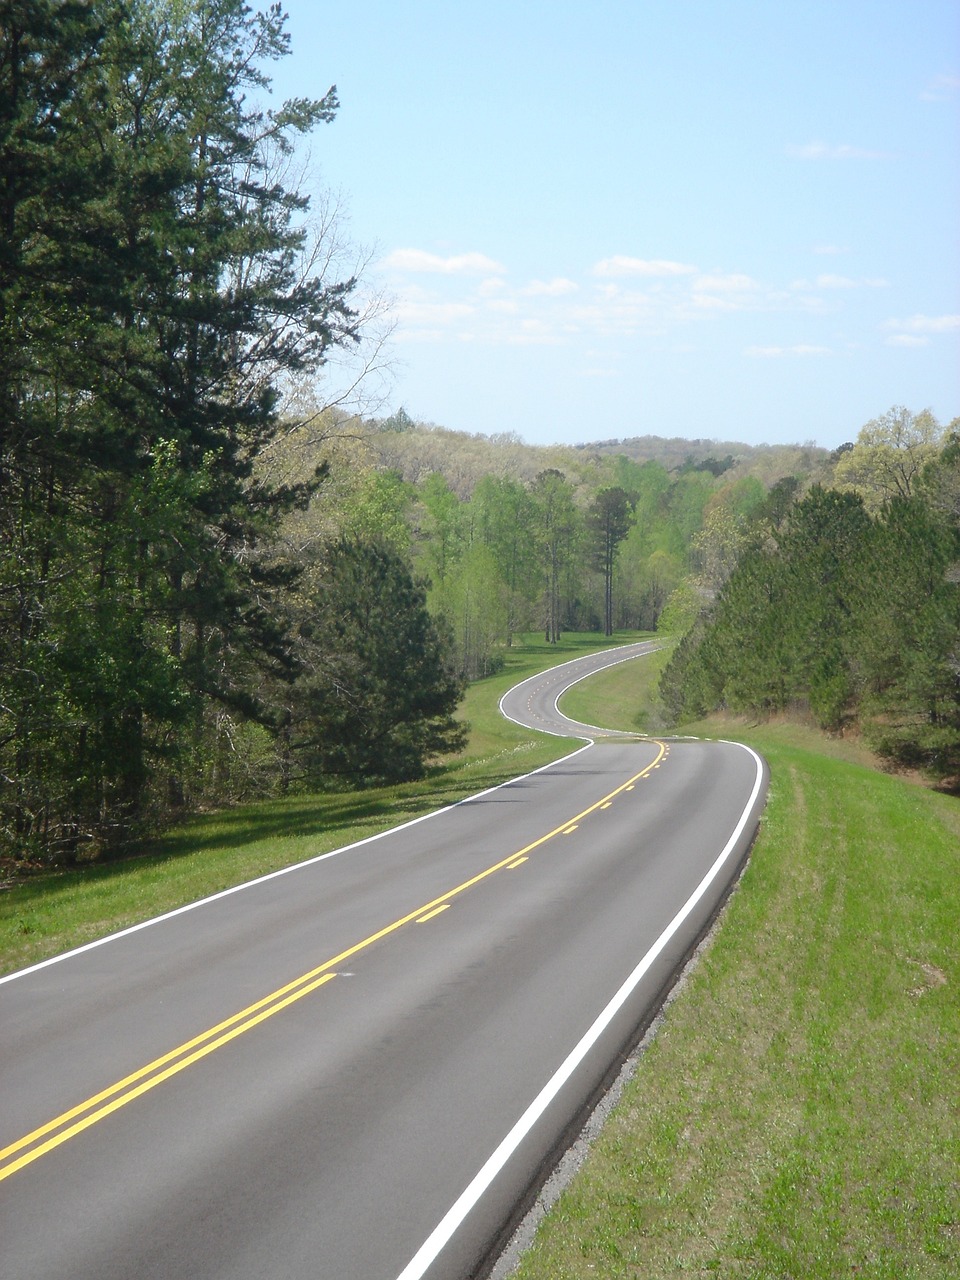 a couple of yellow lines on the side of a road, by Robert Lee Eskridge, flickr, cahaba river alabama, green pastures stretch for miles, serpentine curve!!!, riding on the road